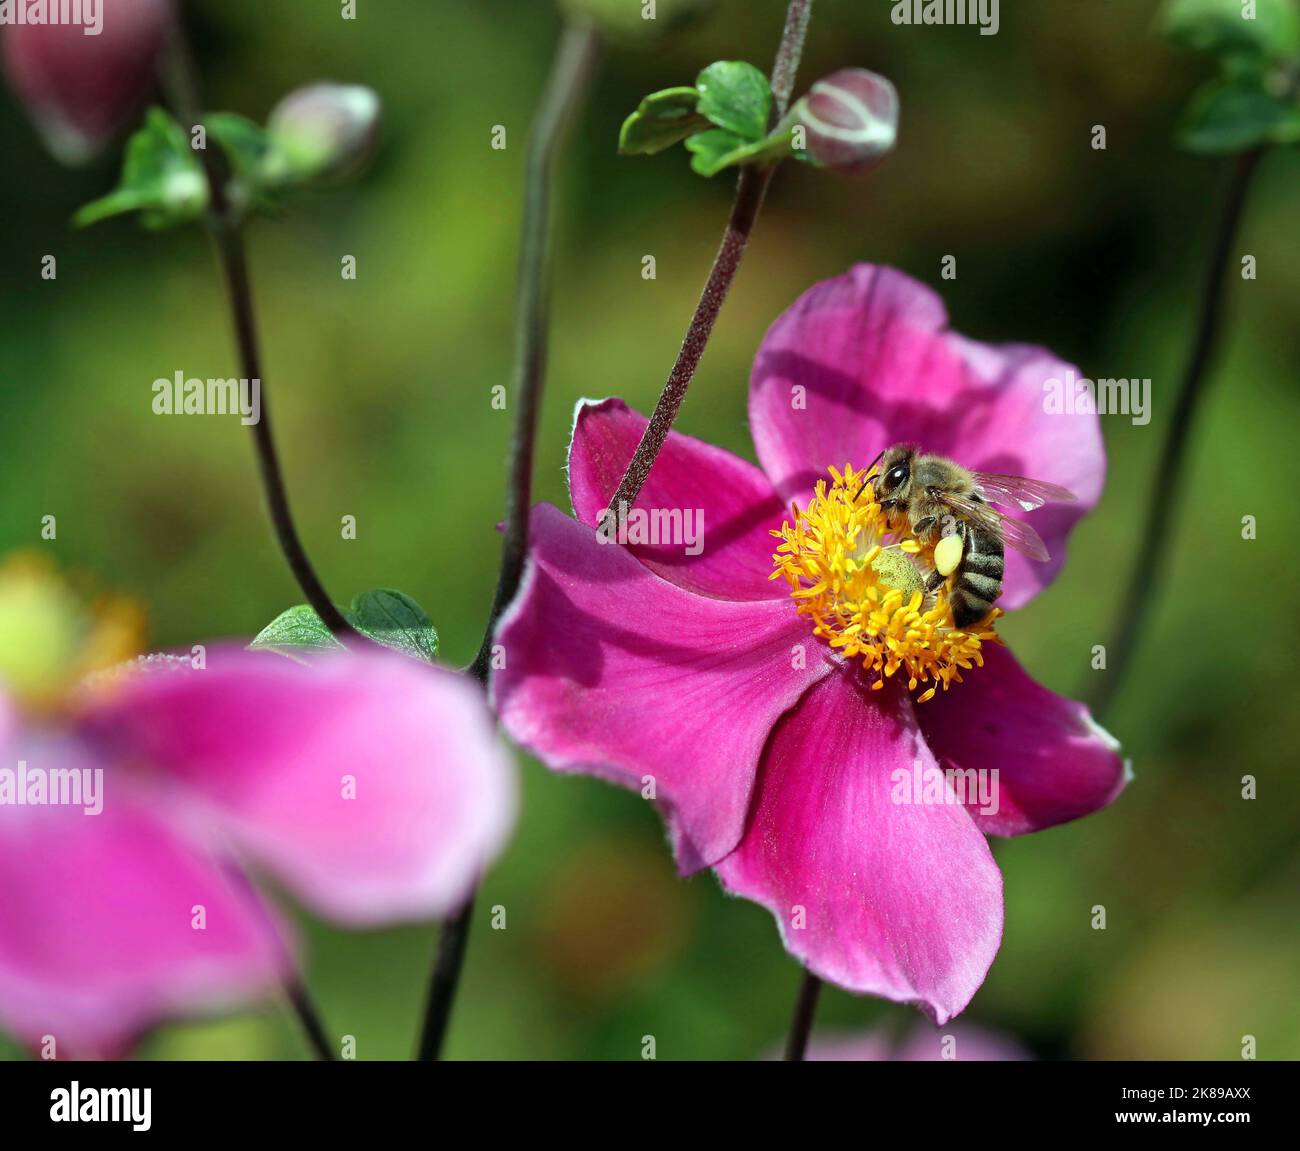 A honey bee gathers pollen and nectar from the yellow stamens of a pink anemone flower, the Japanese Anemone 'Rosenschale'. September, England Stock Photo